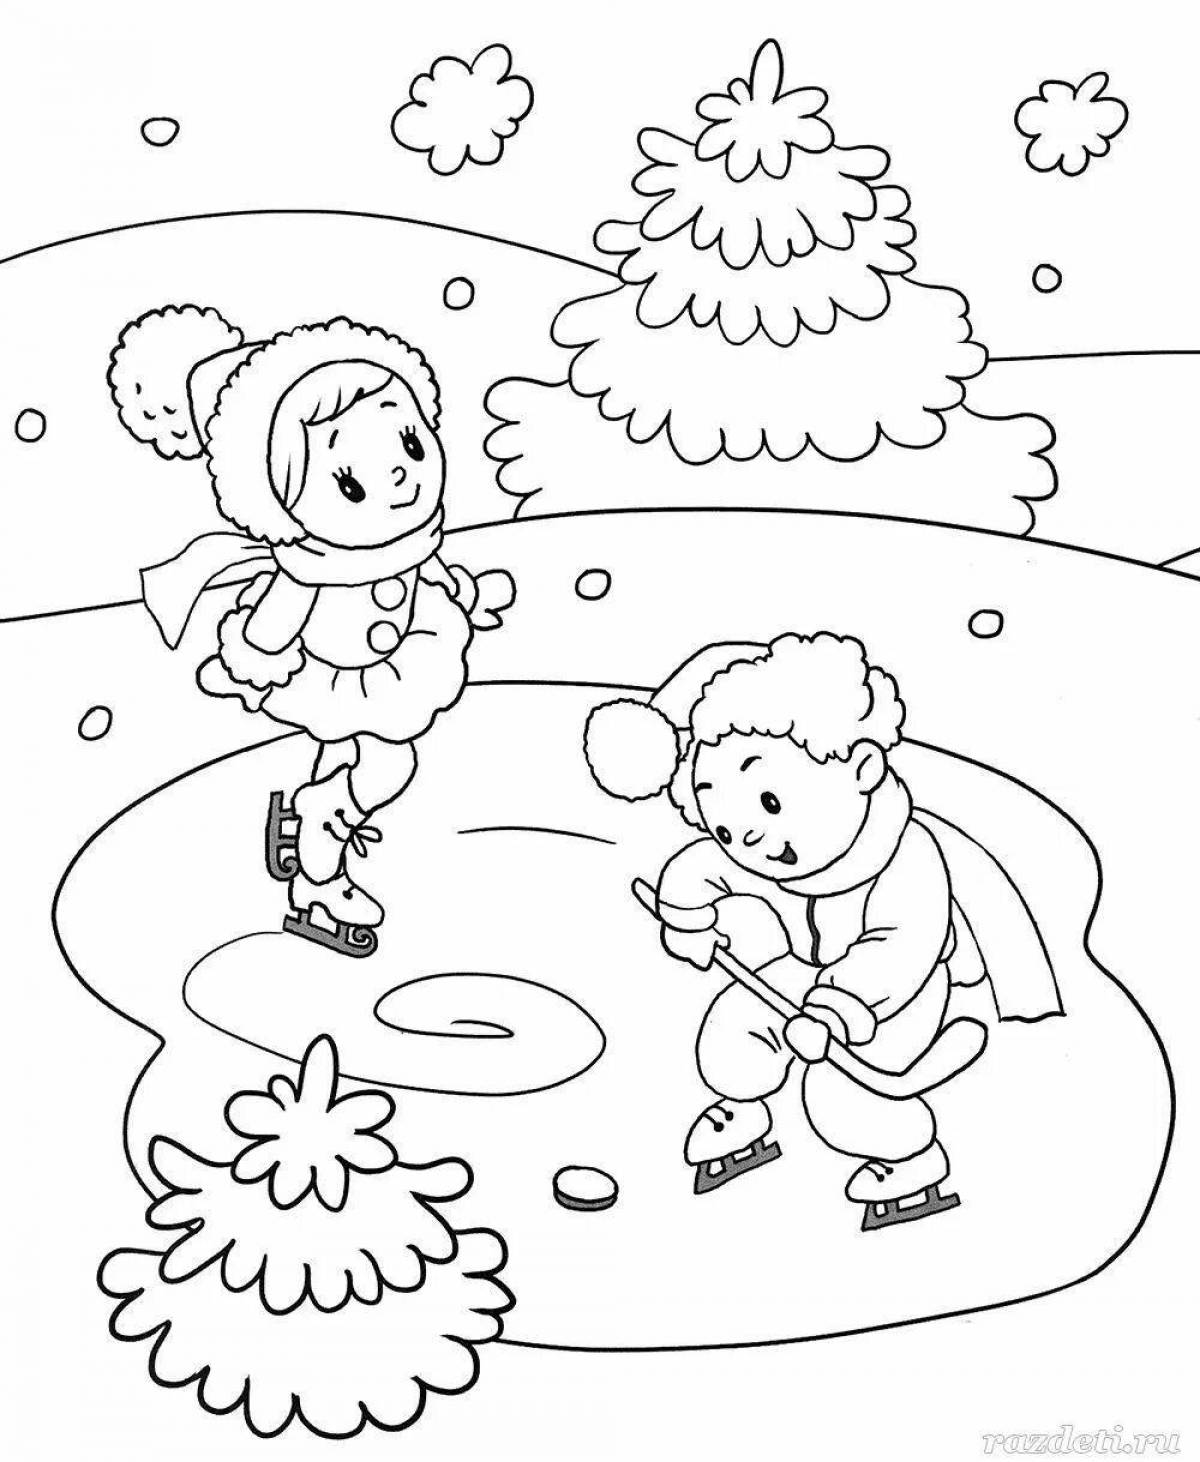 Glowing winter coloring book for children 2-3 years old